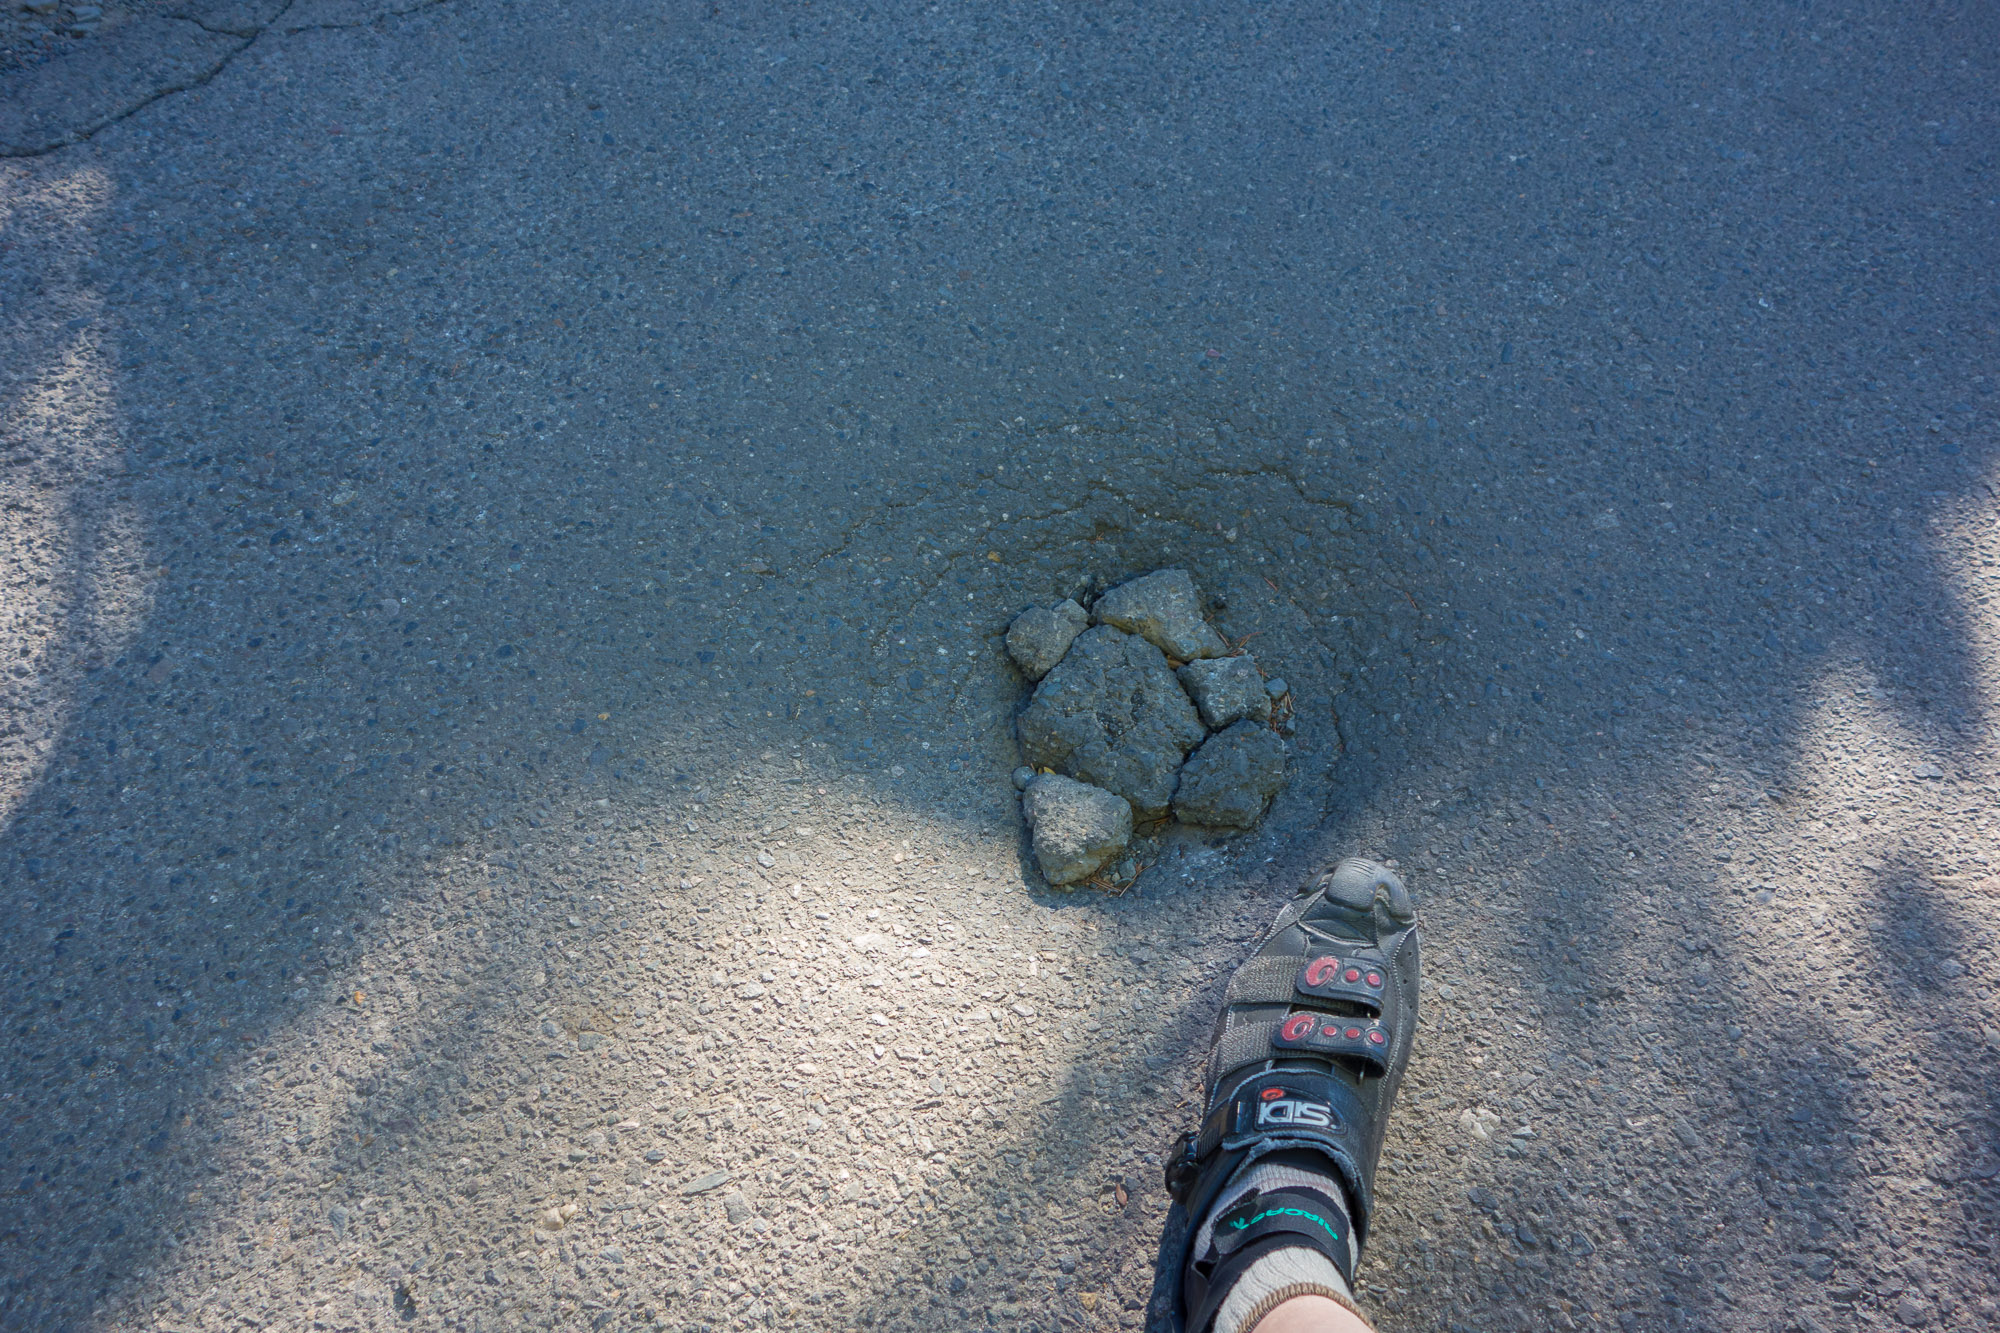 After taking this photo, on my way down the road I succeeded in riding into this dip in the asphalt.  Fortunately, someone had placed some stones in the hole, reducing the severity.